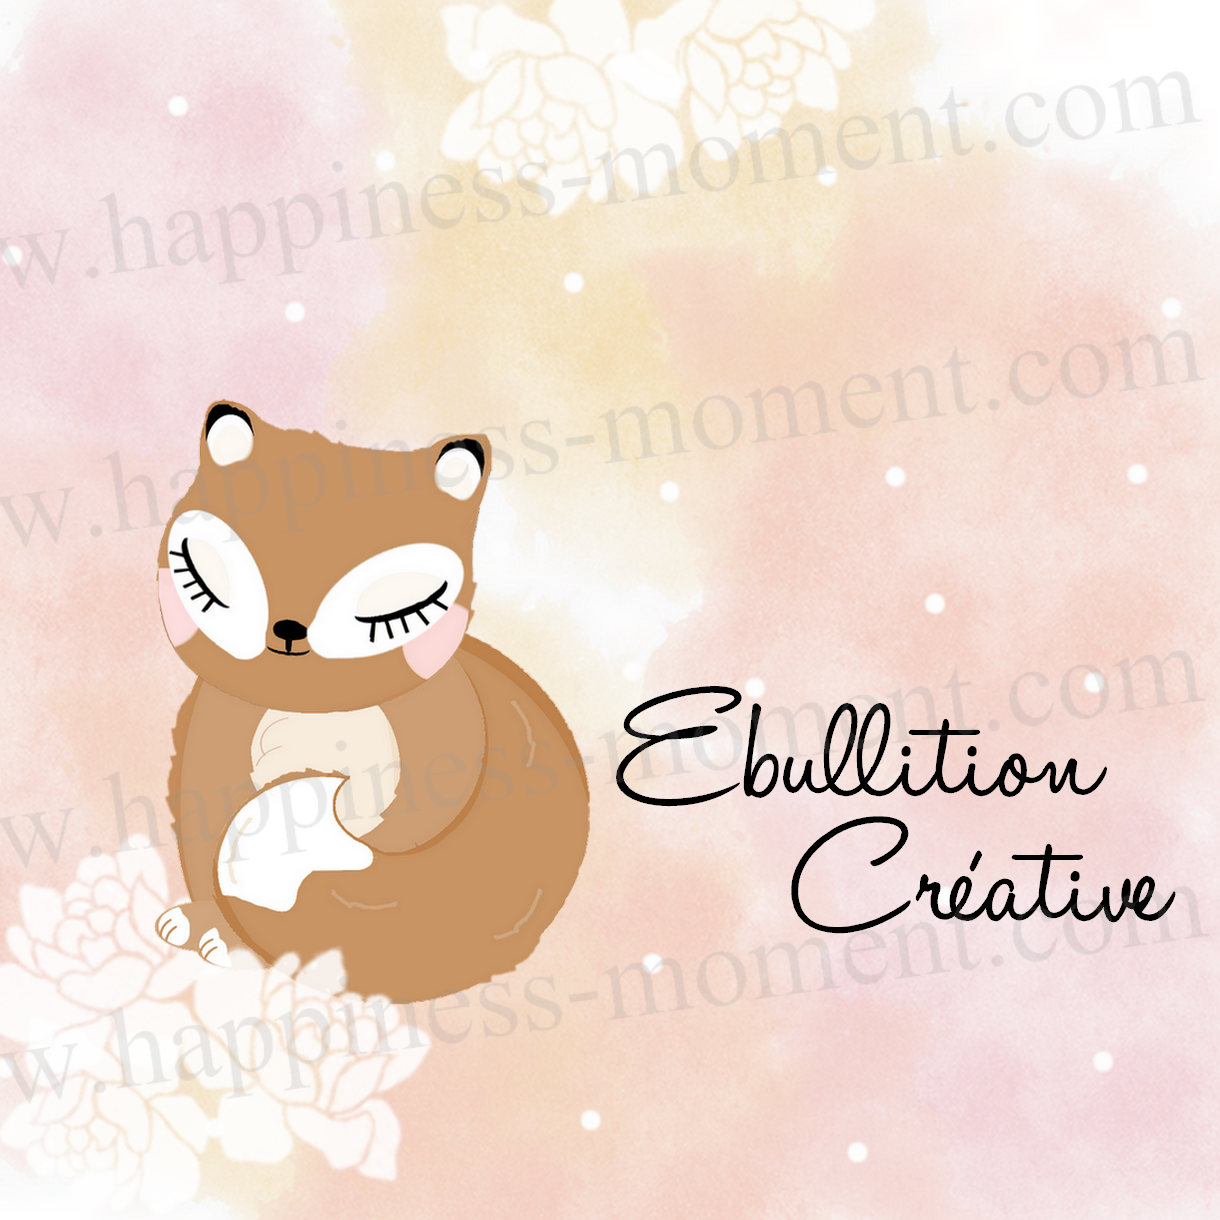 http://www.happiness-moment.fr/2015/01/logo-pour-ebullition-creative.html